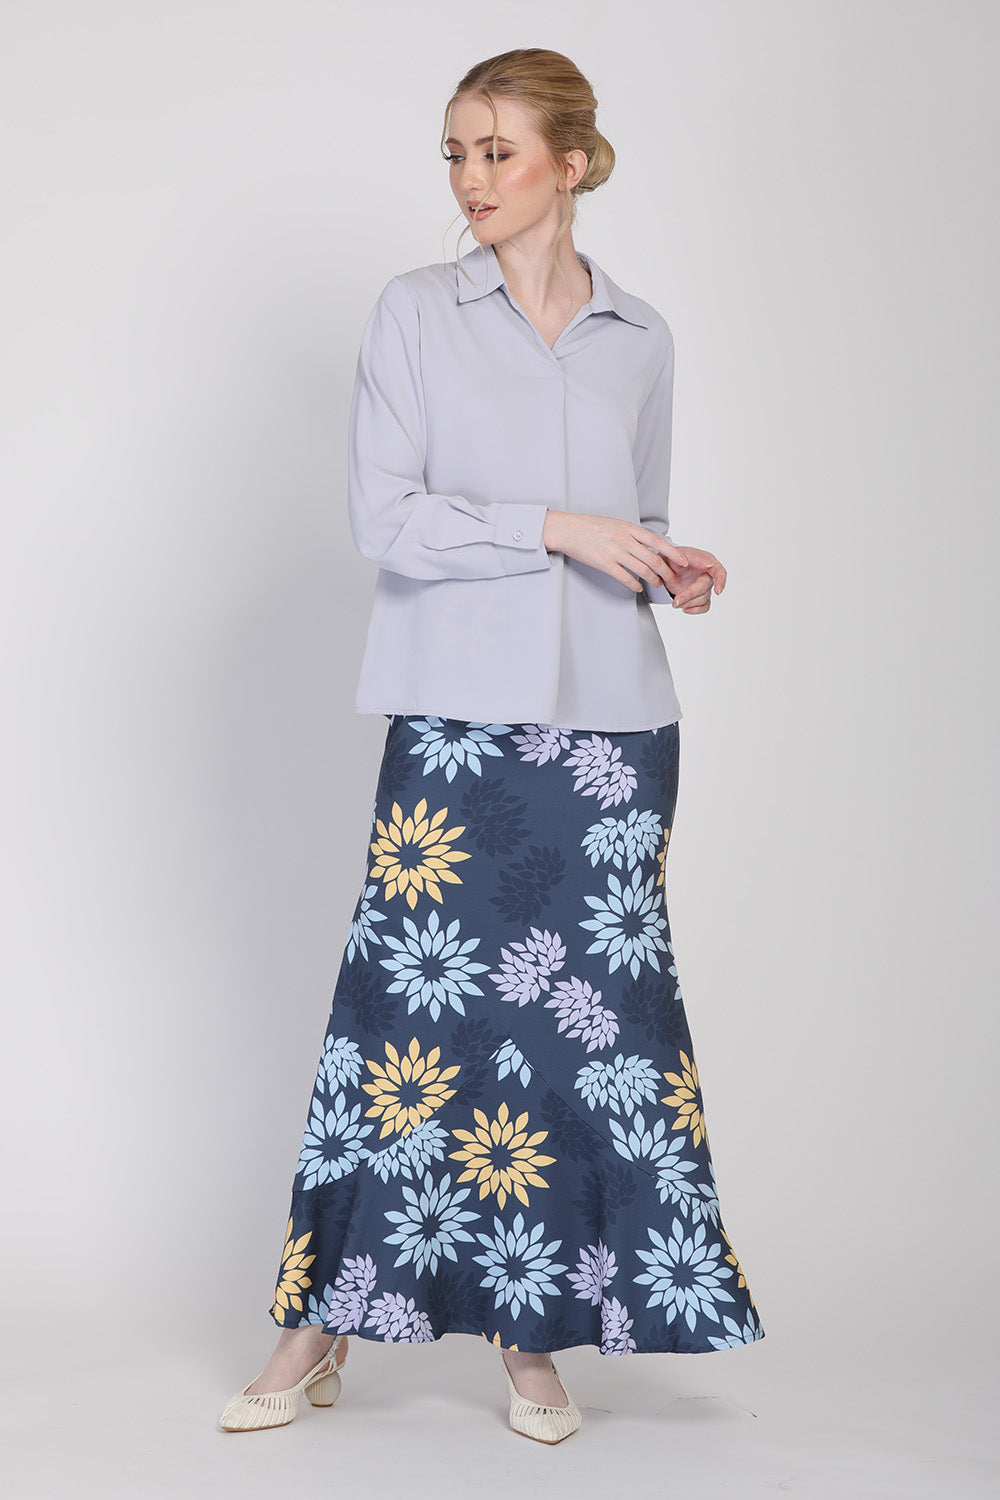 The Ceria Pencil Skirts in Floral Prints